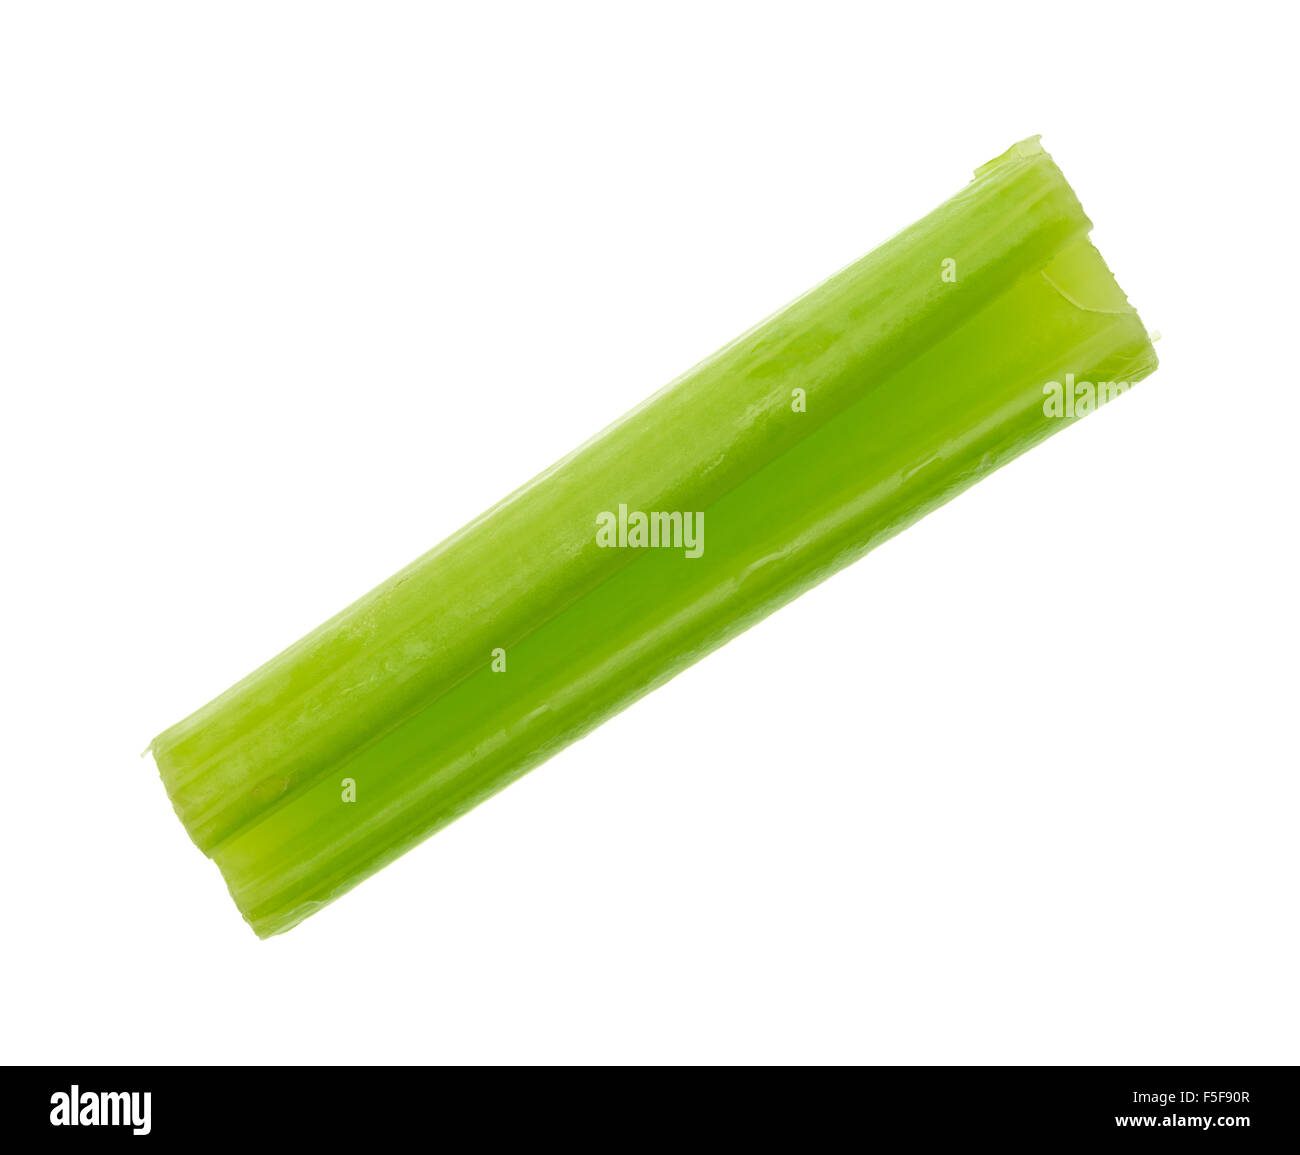 A small celery stick isolated on a white background. Stock Photo